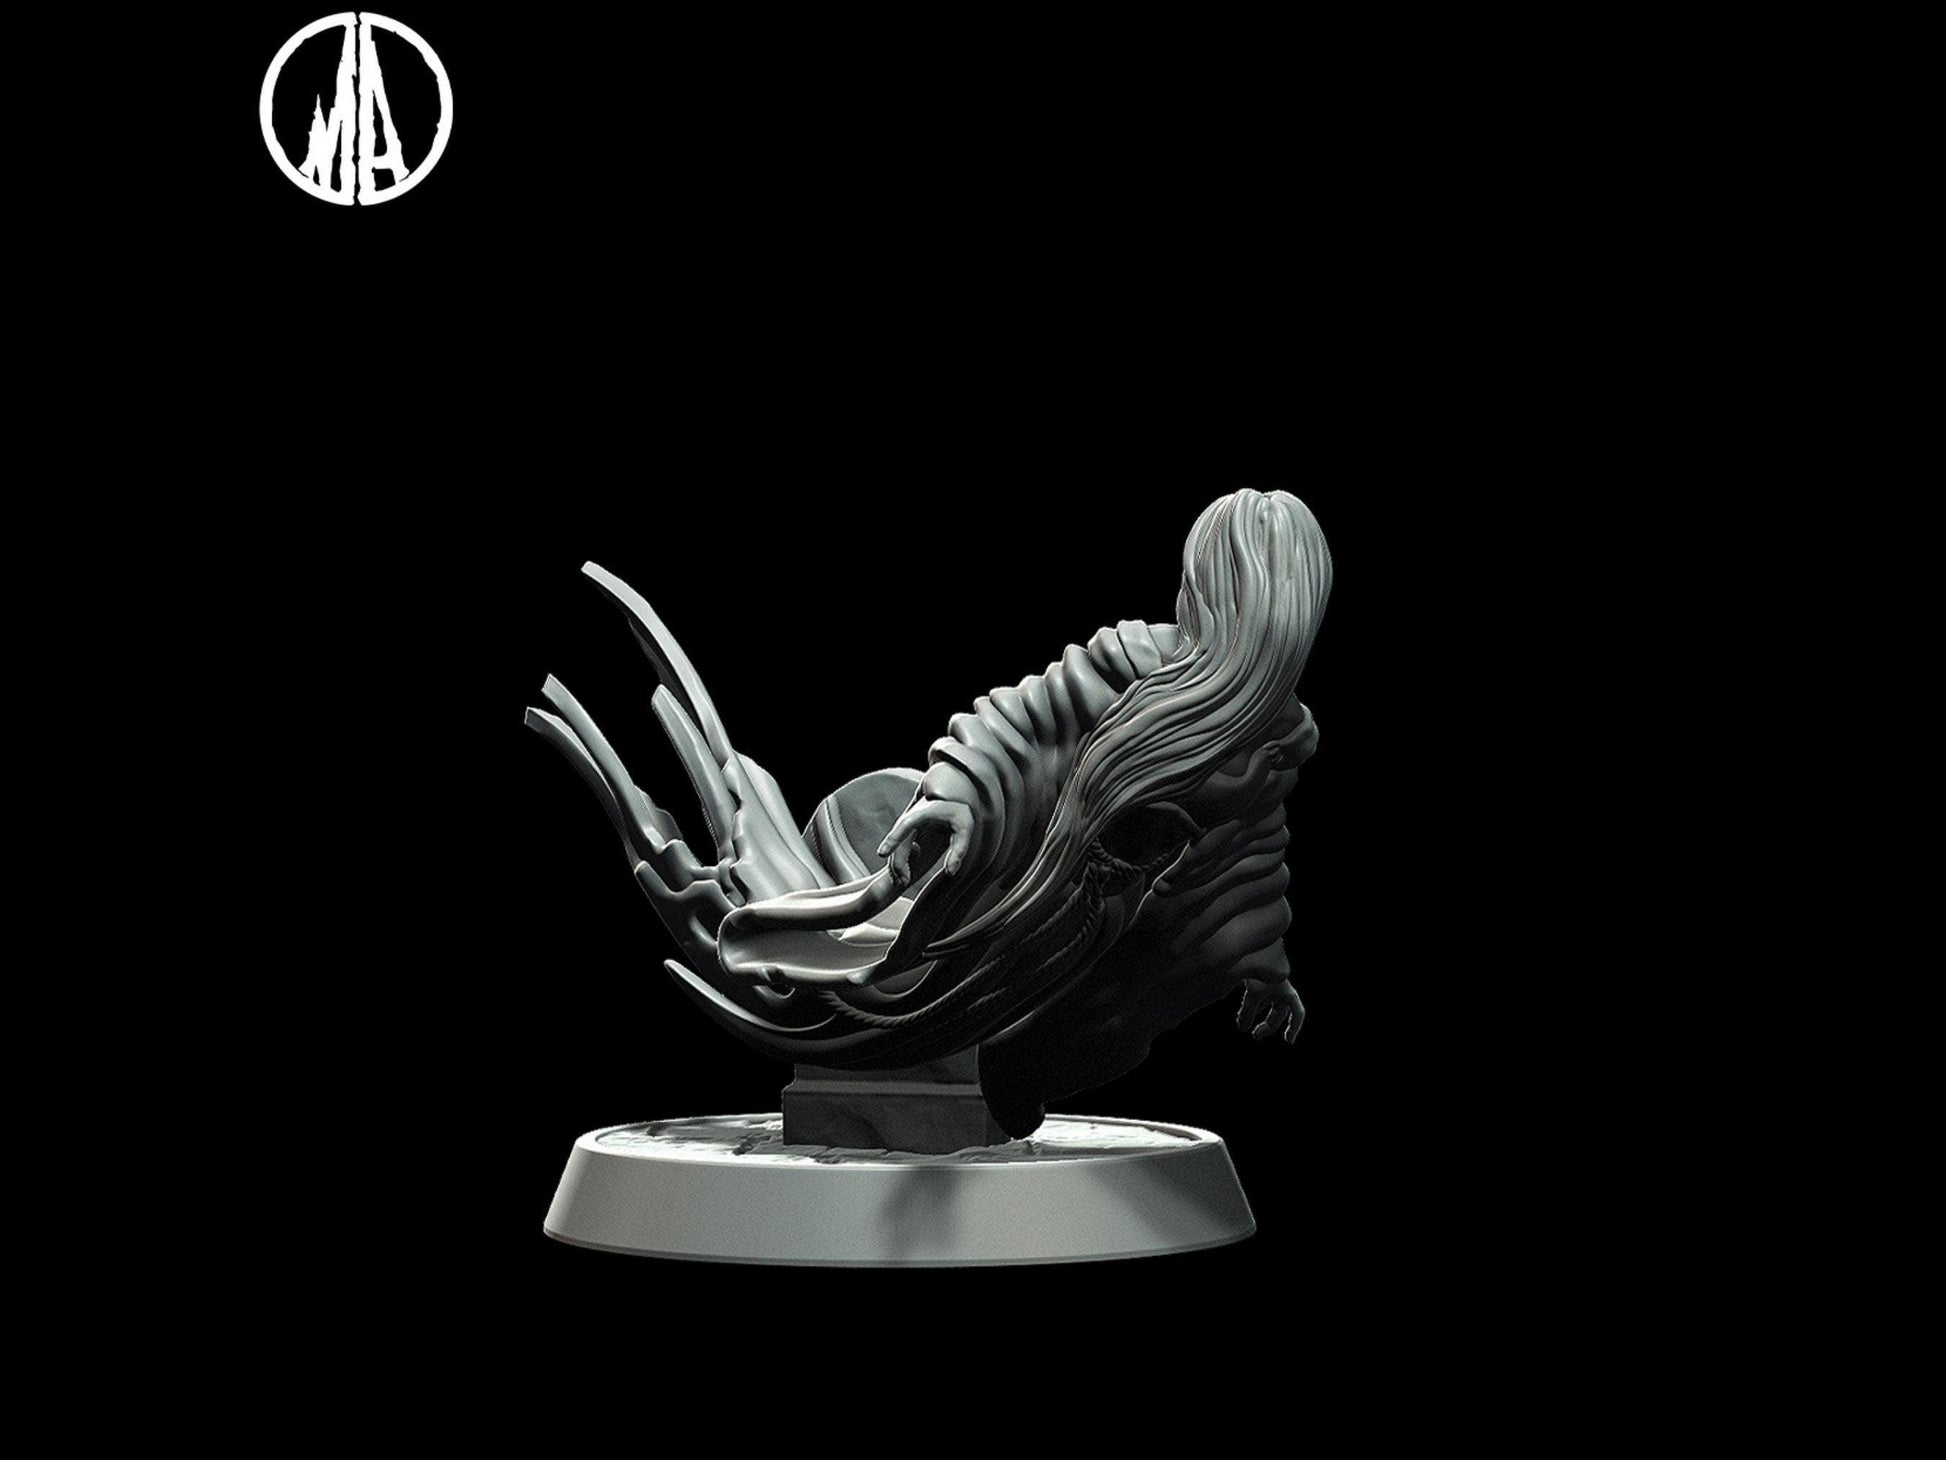 Banshee Miniature undead miniature ghost miniature - 5 Poses - 28mm scale Tabletop gaming DnD Miniature Dungeons and Dragons,dnd 5e - Plague Miniatures shop for DnD Miniatures